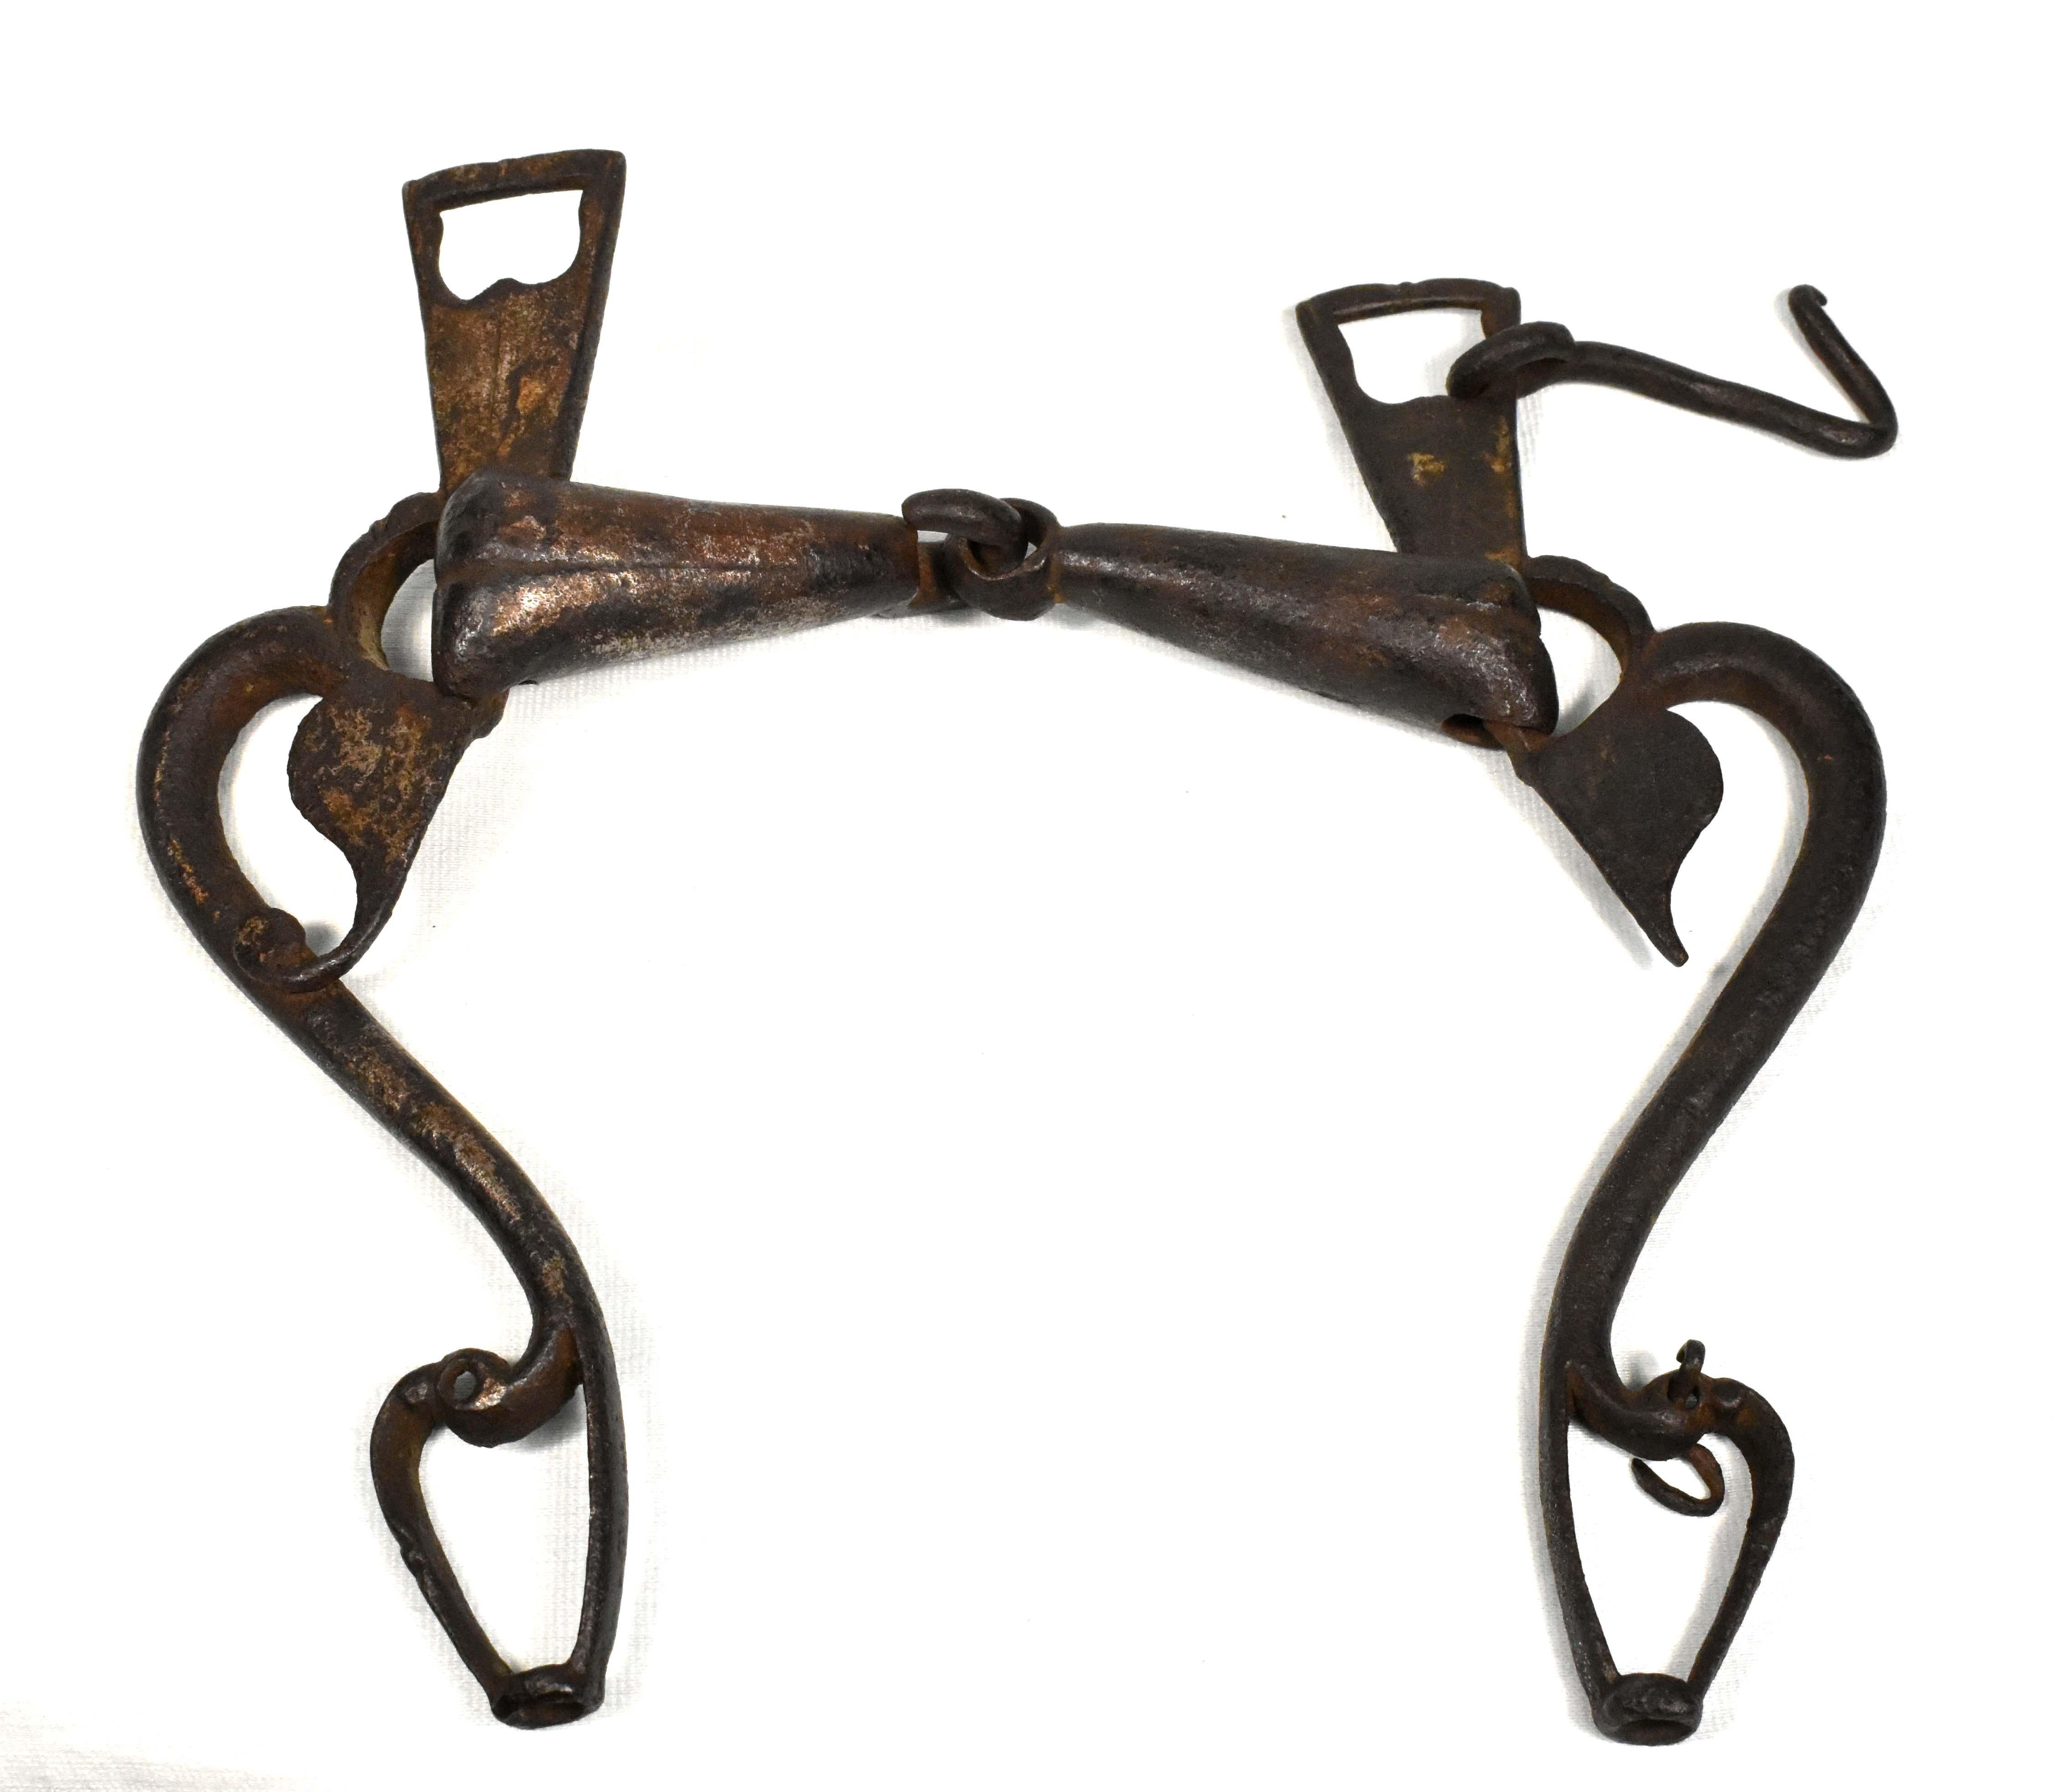 Unique historical horse bit probably from the 16th or 17th century. It is very well preserved for its age, the condition corresponds to its age, there is no major mechanical or rust damage. This is historical European work . This is a very